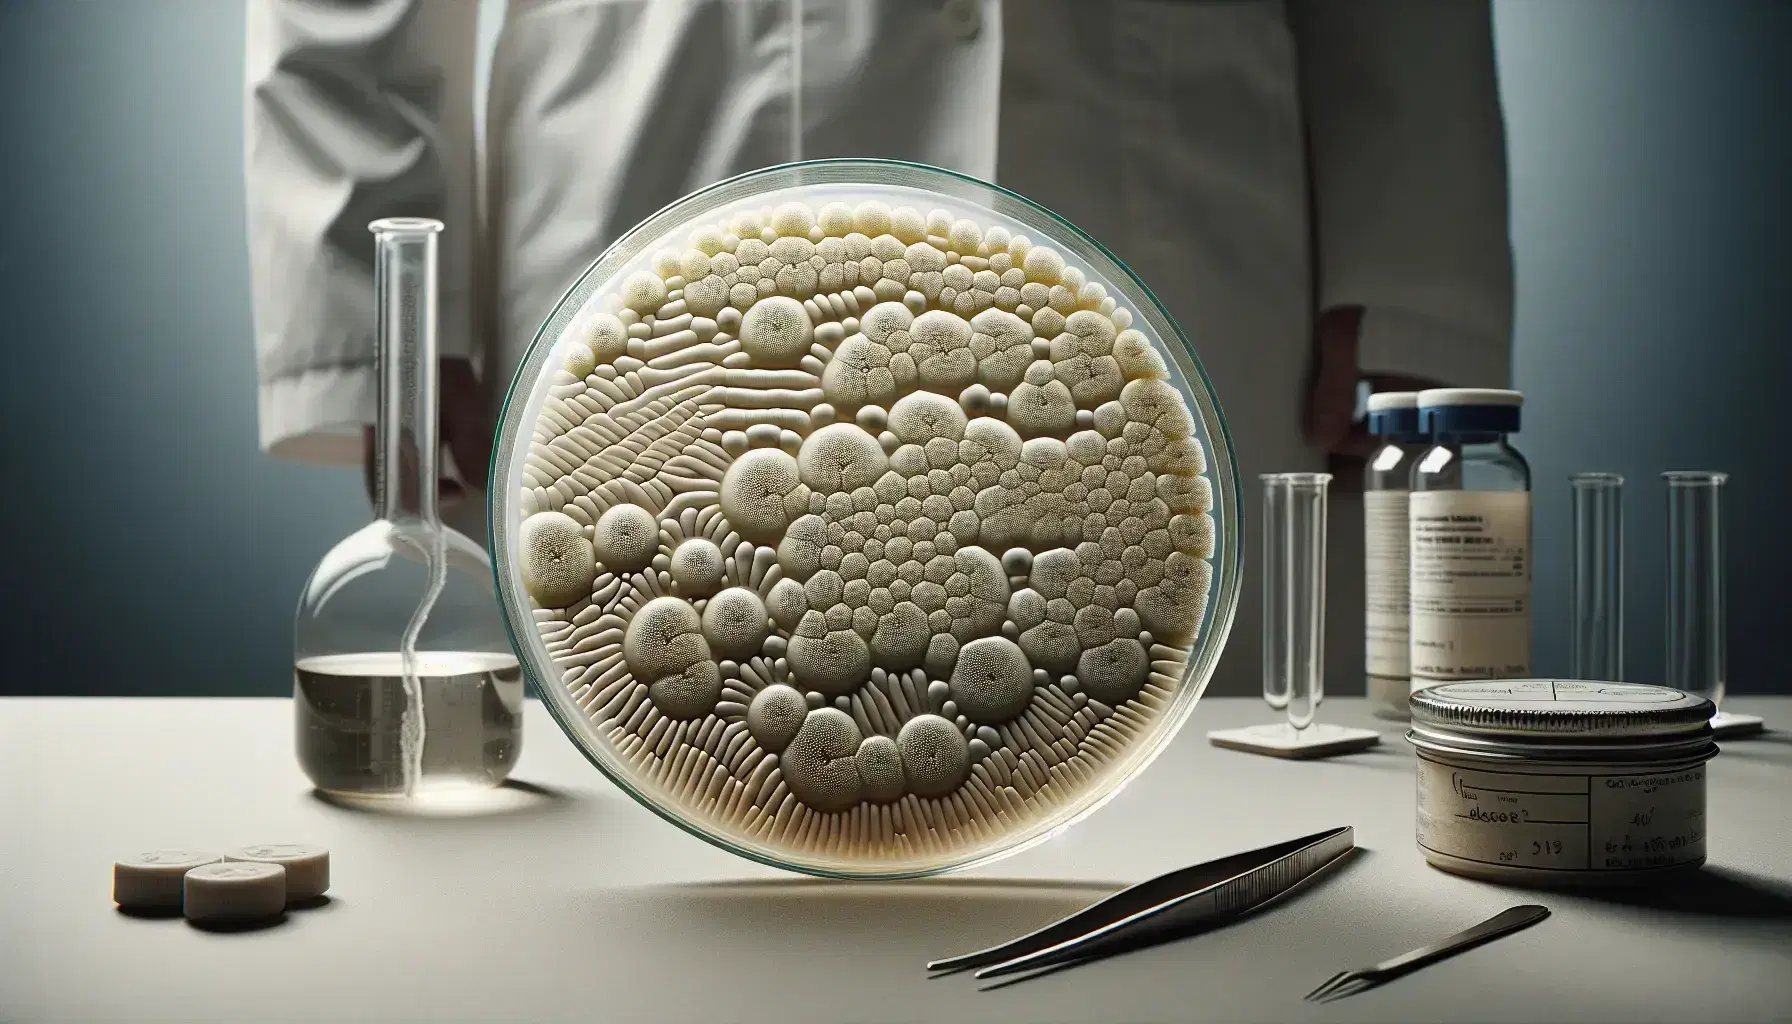 Petri dish with bacterial colonies on lab bench alongside tweezers, pipette, and vial, with a blurred figure in a lab coat in the background.